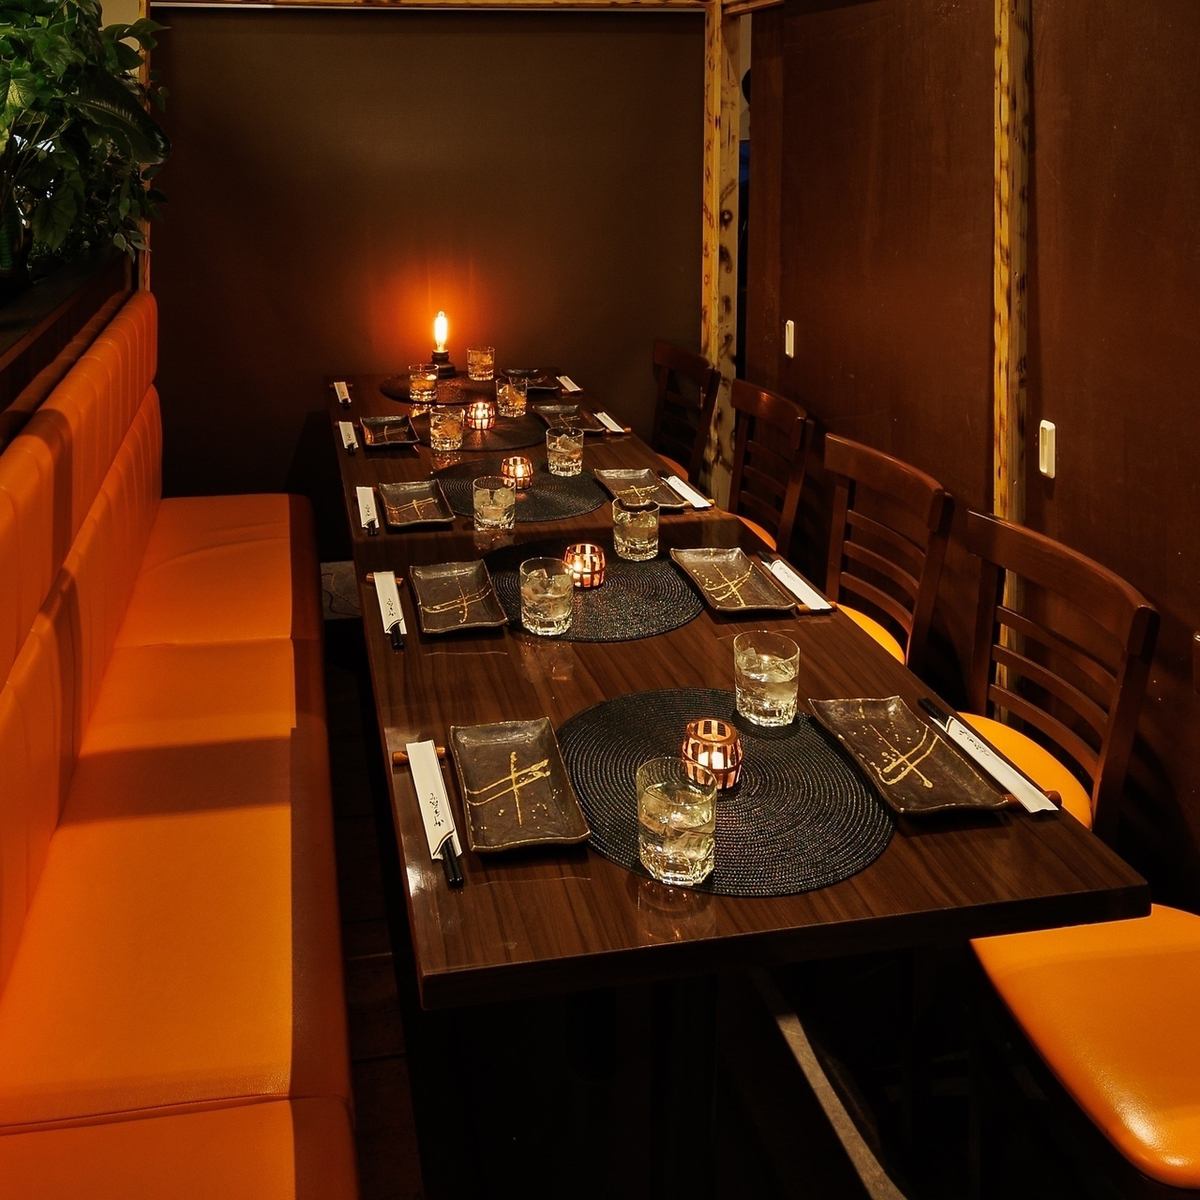 All seats are private rooms! Private rooms can accommodate from 2 to 180 people